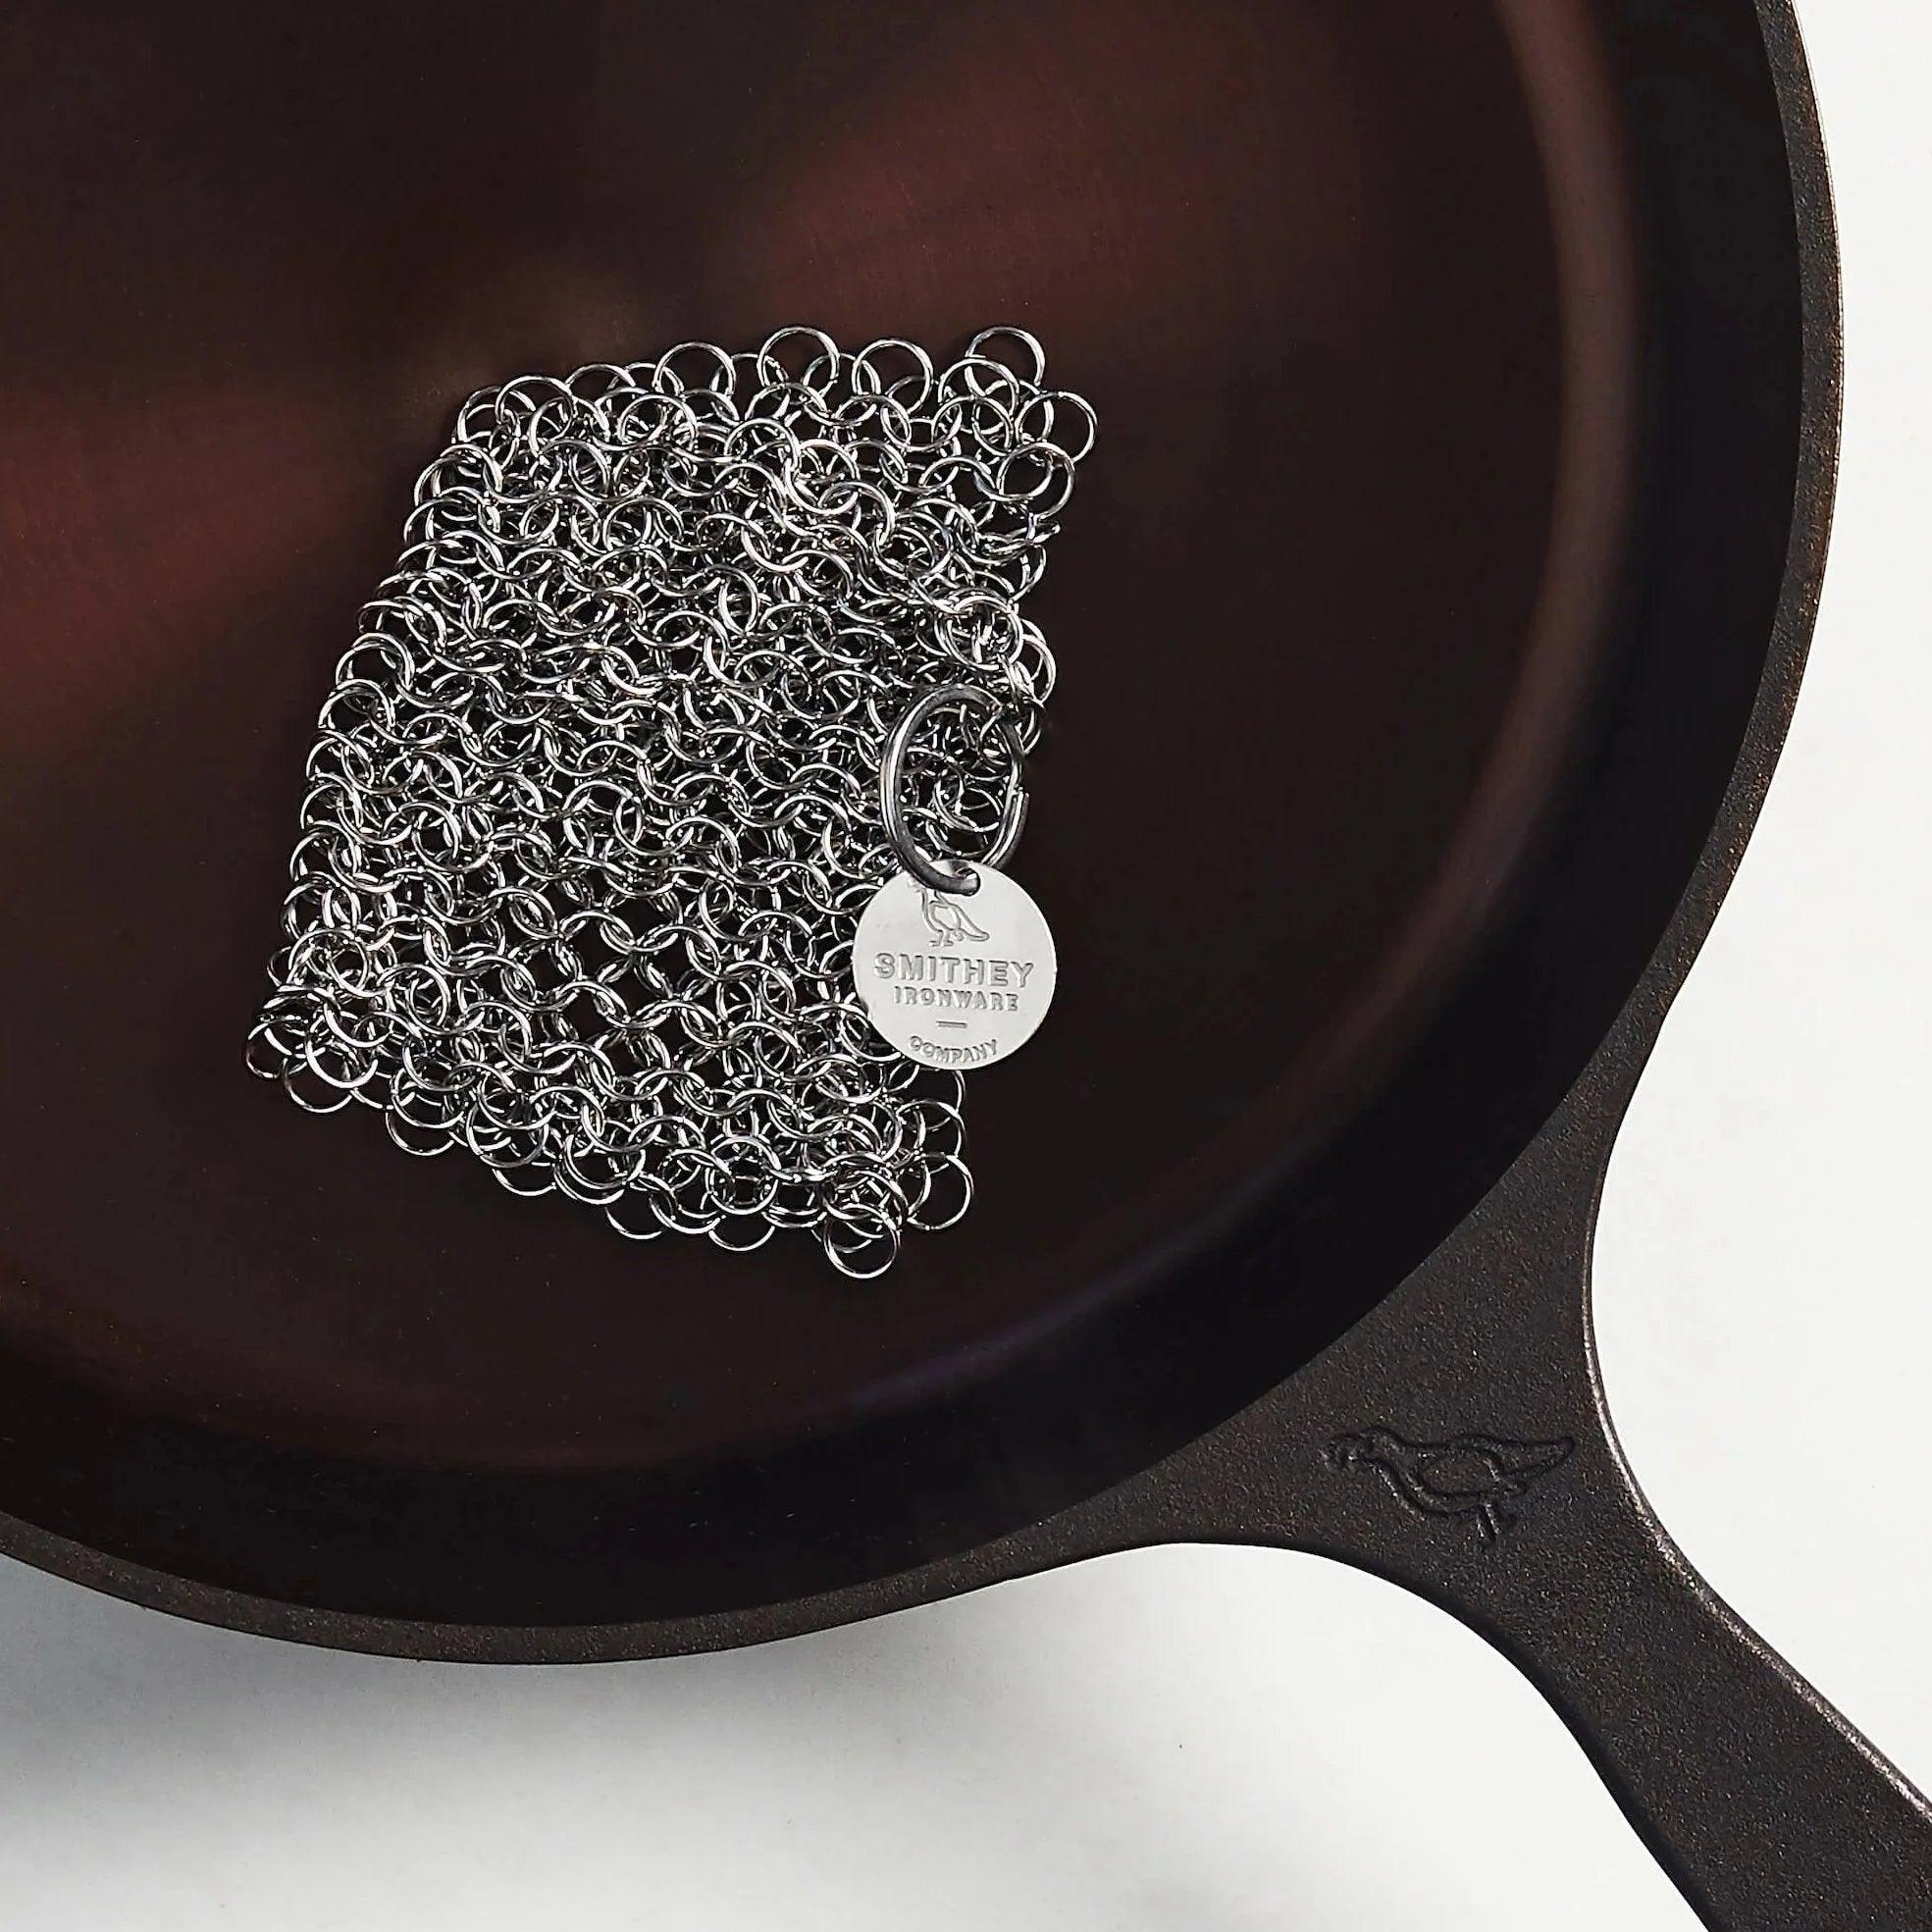 Smithey chainmail pan scrubber in a cast iron pan